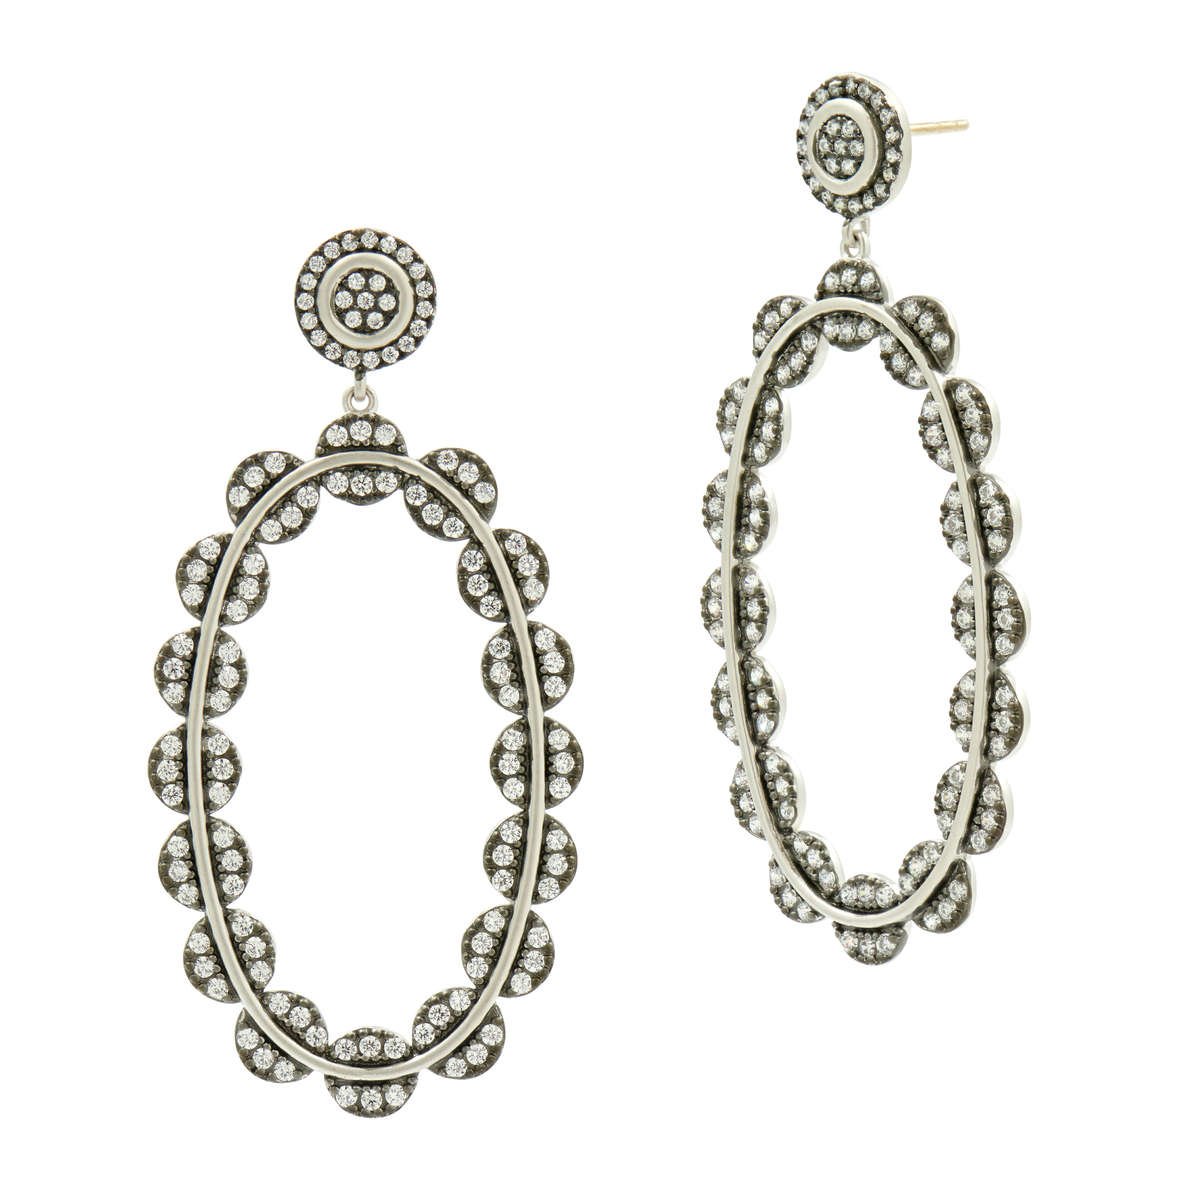 Freida Rothman | Luxury Jewelry, Earrings, Pendent & Gifts Accessories